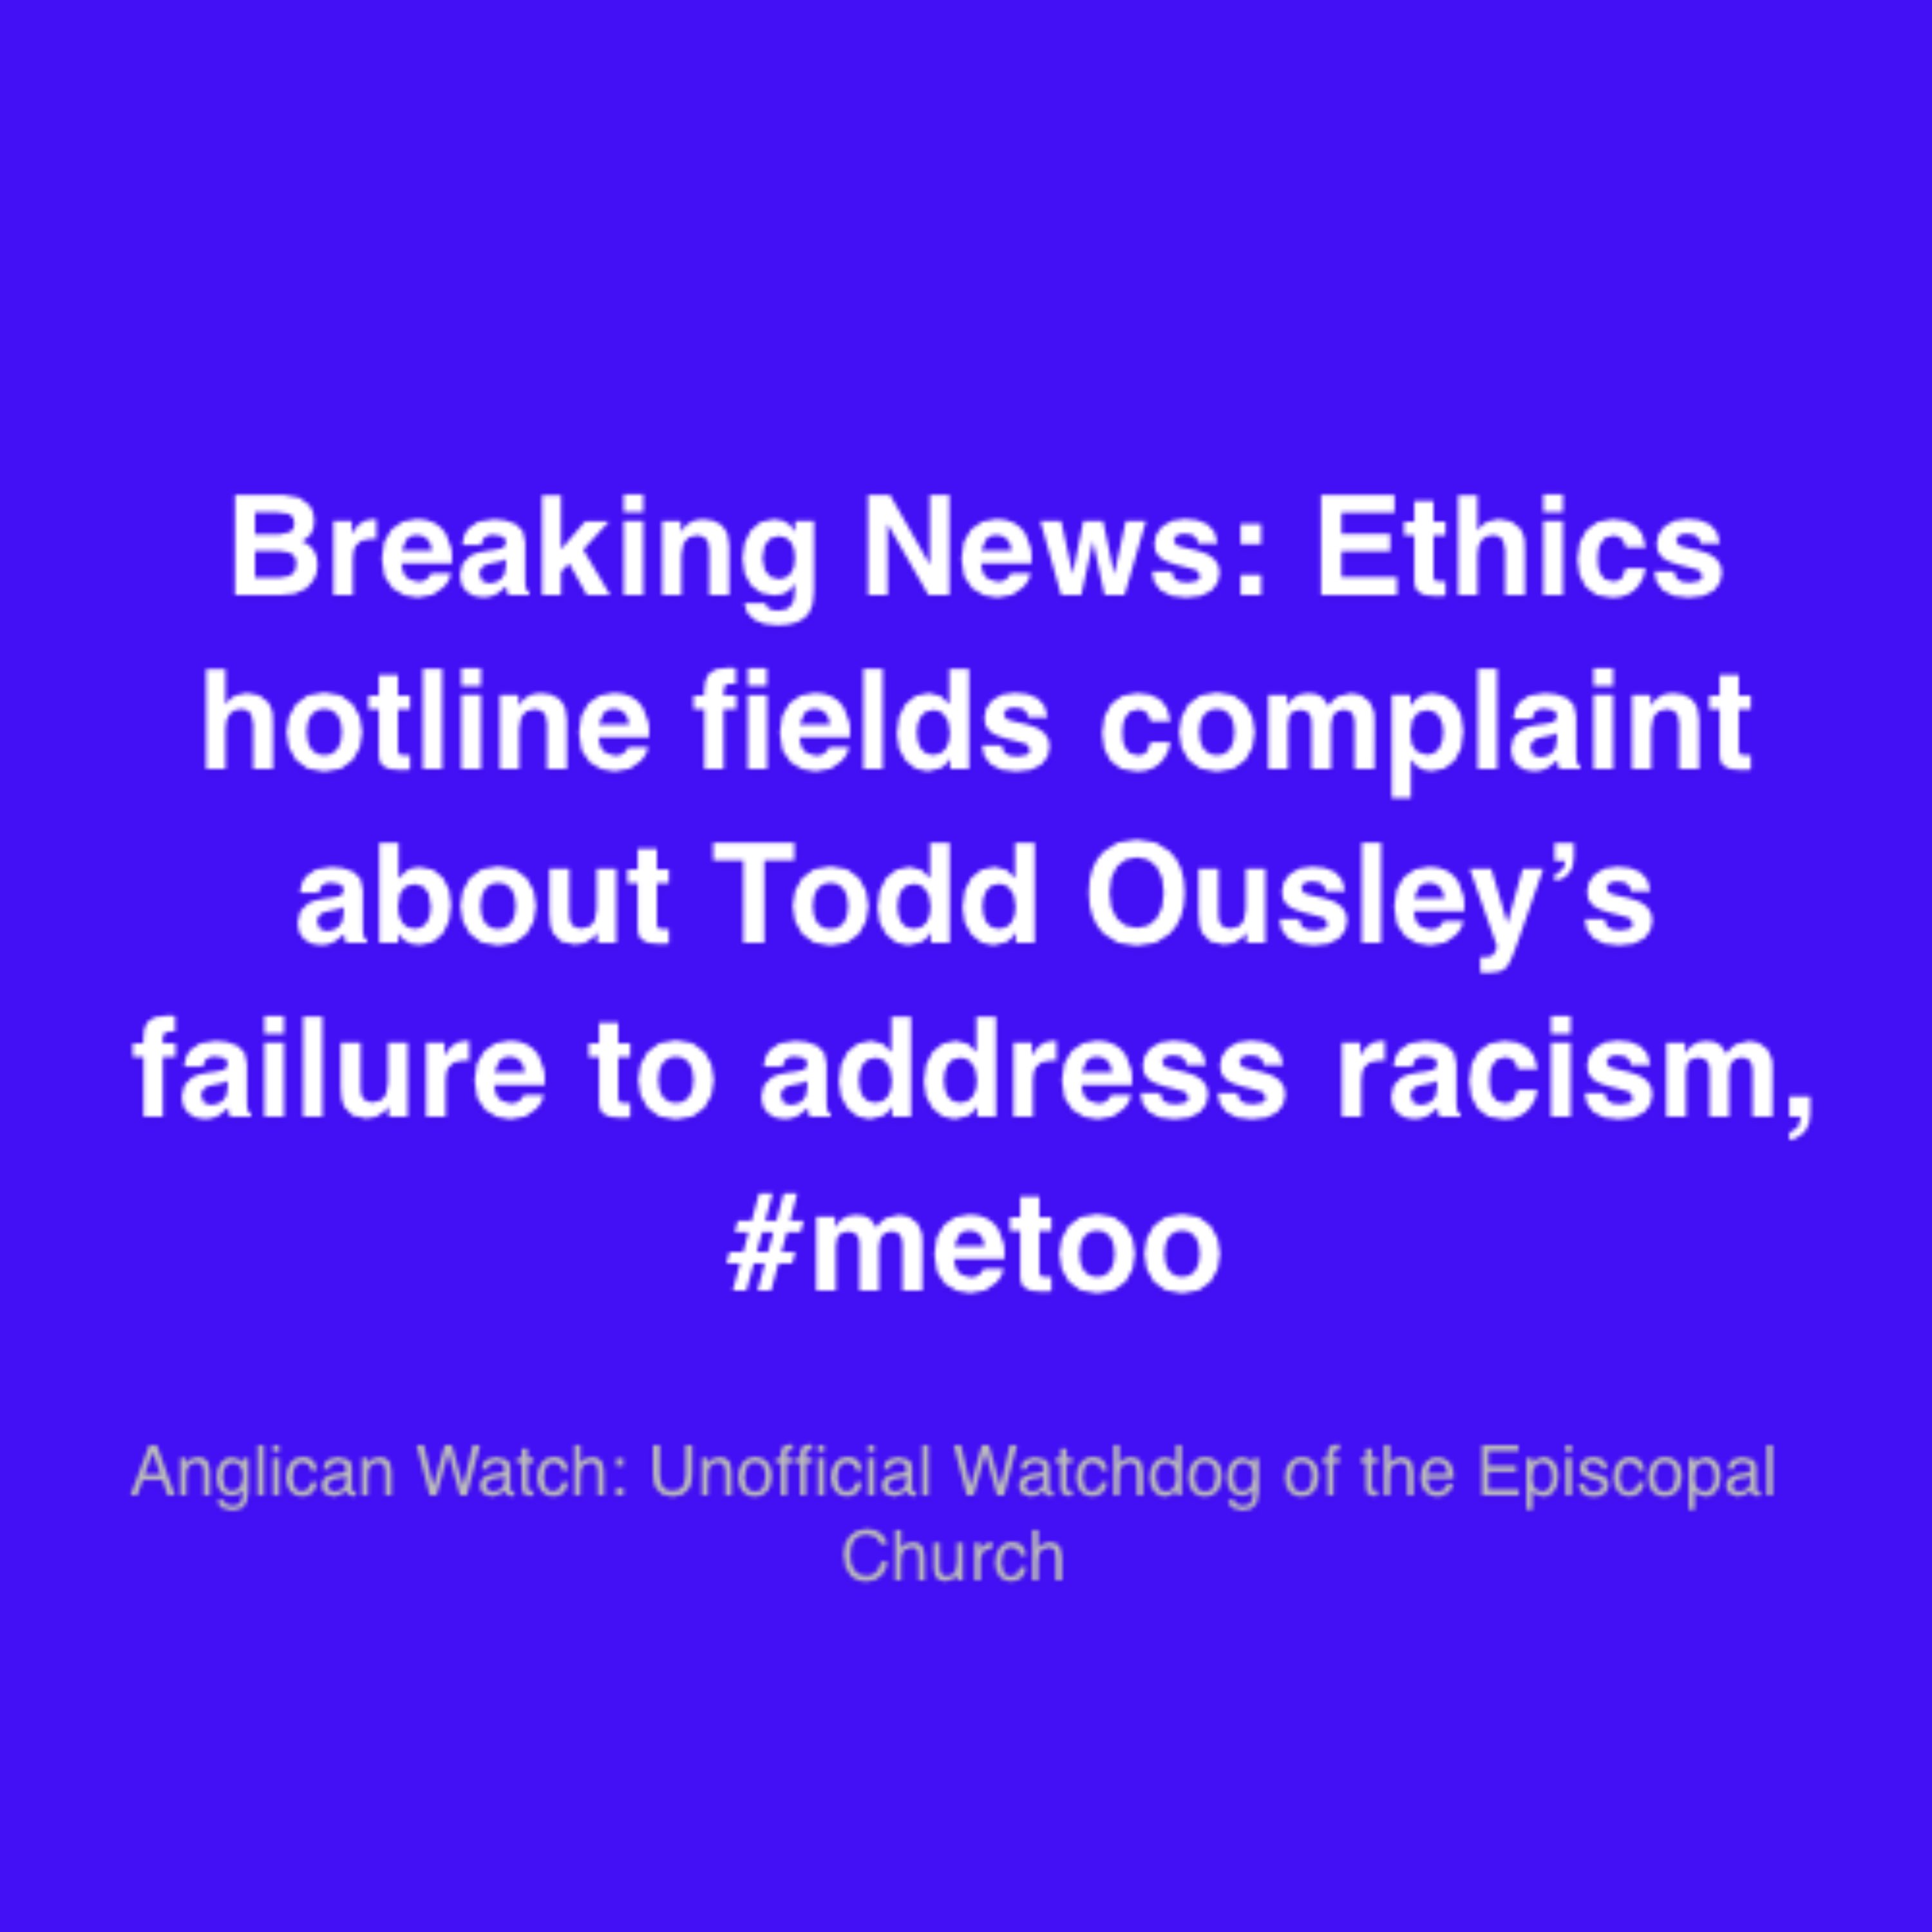 Breaking News: Ethics hotline fields complaint about Todd Ousley’s failure to address racism, #metoo